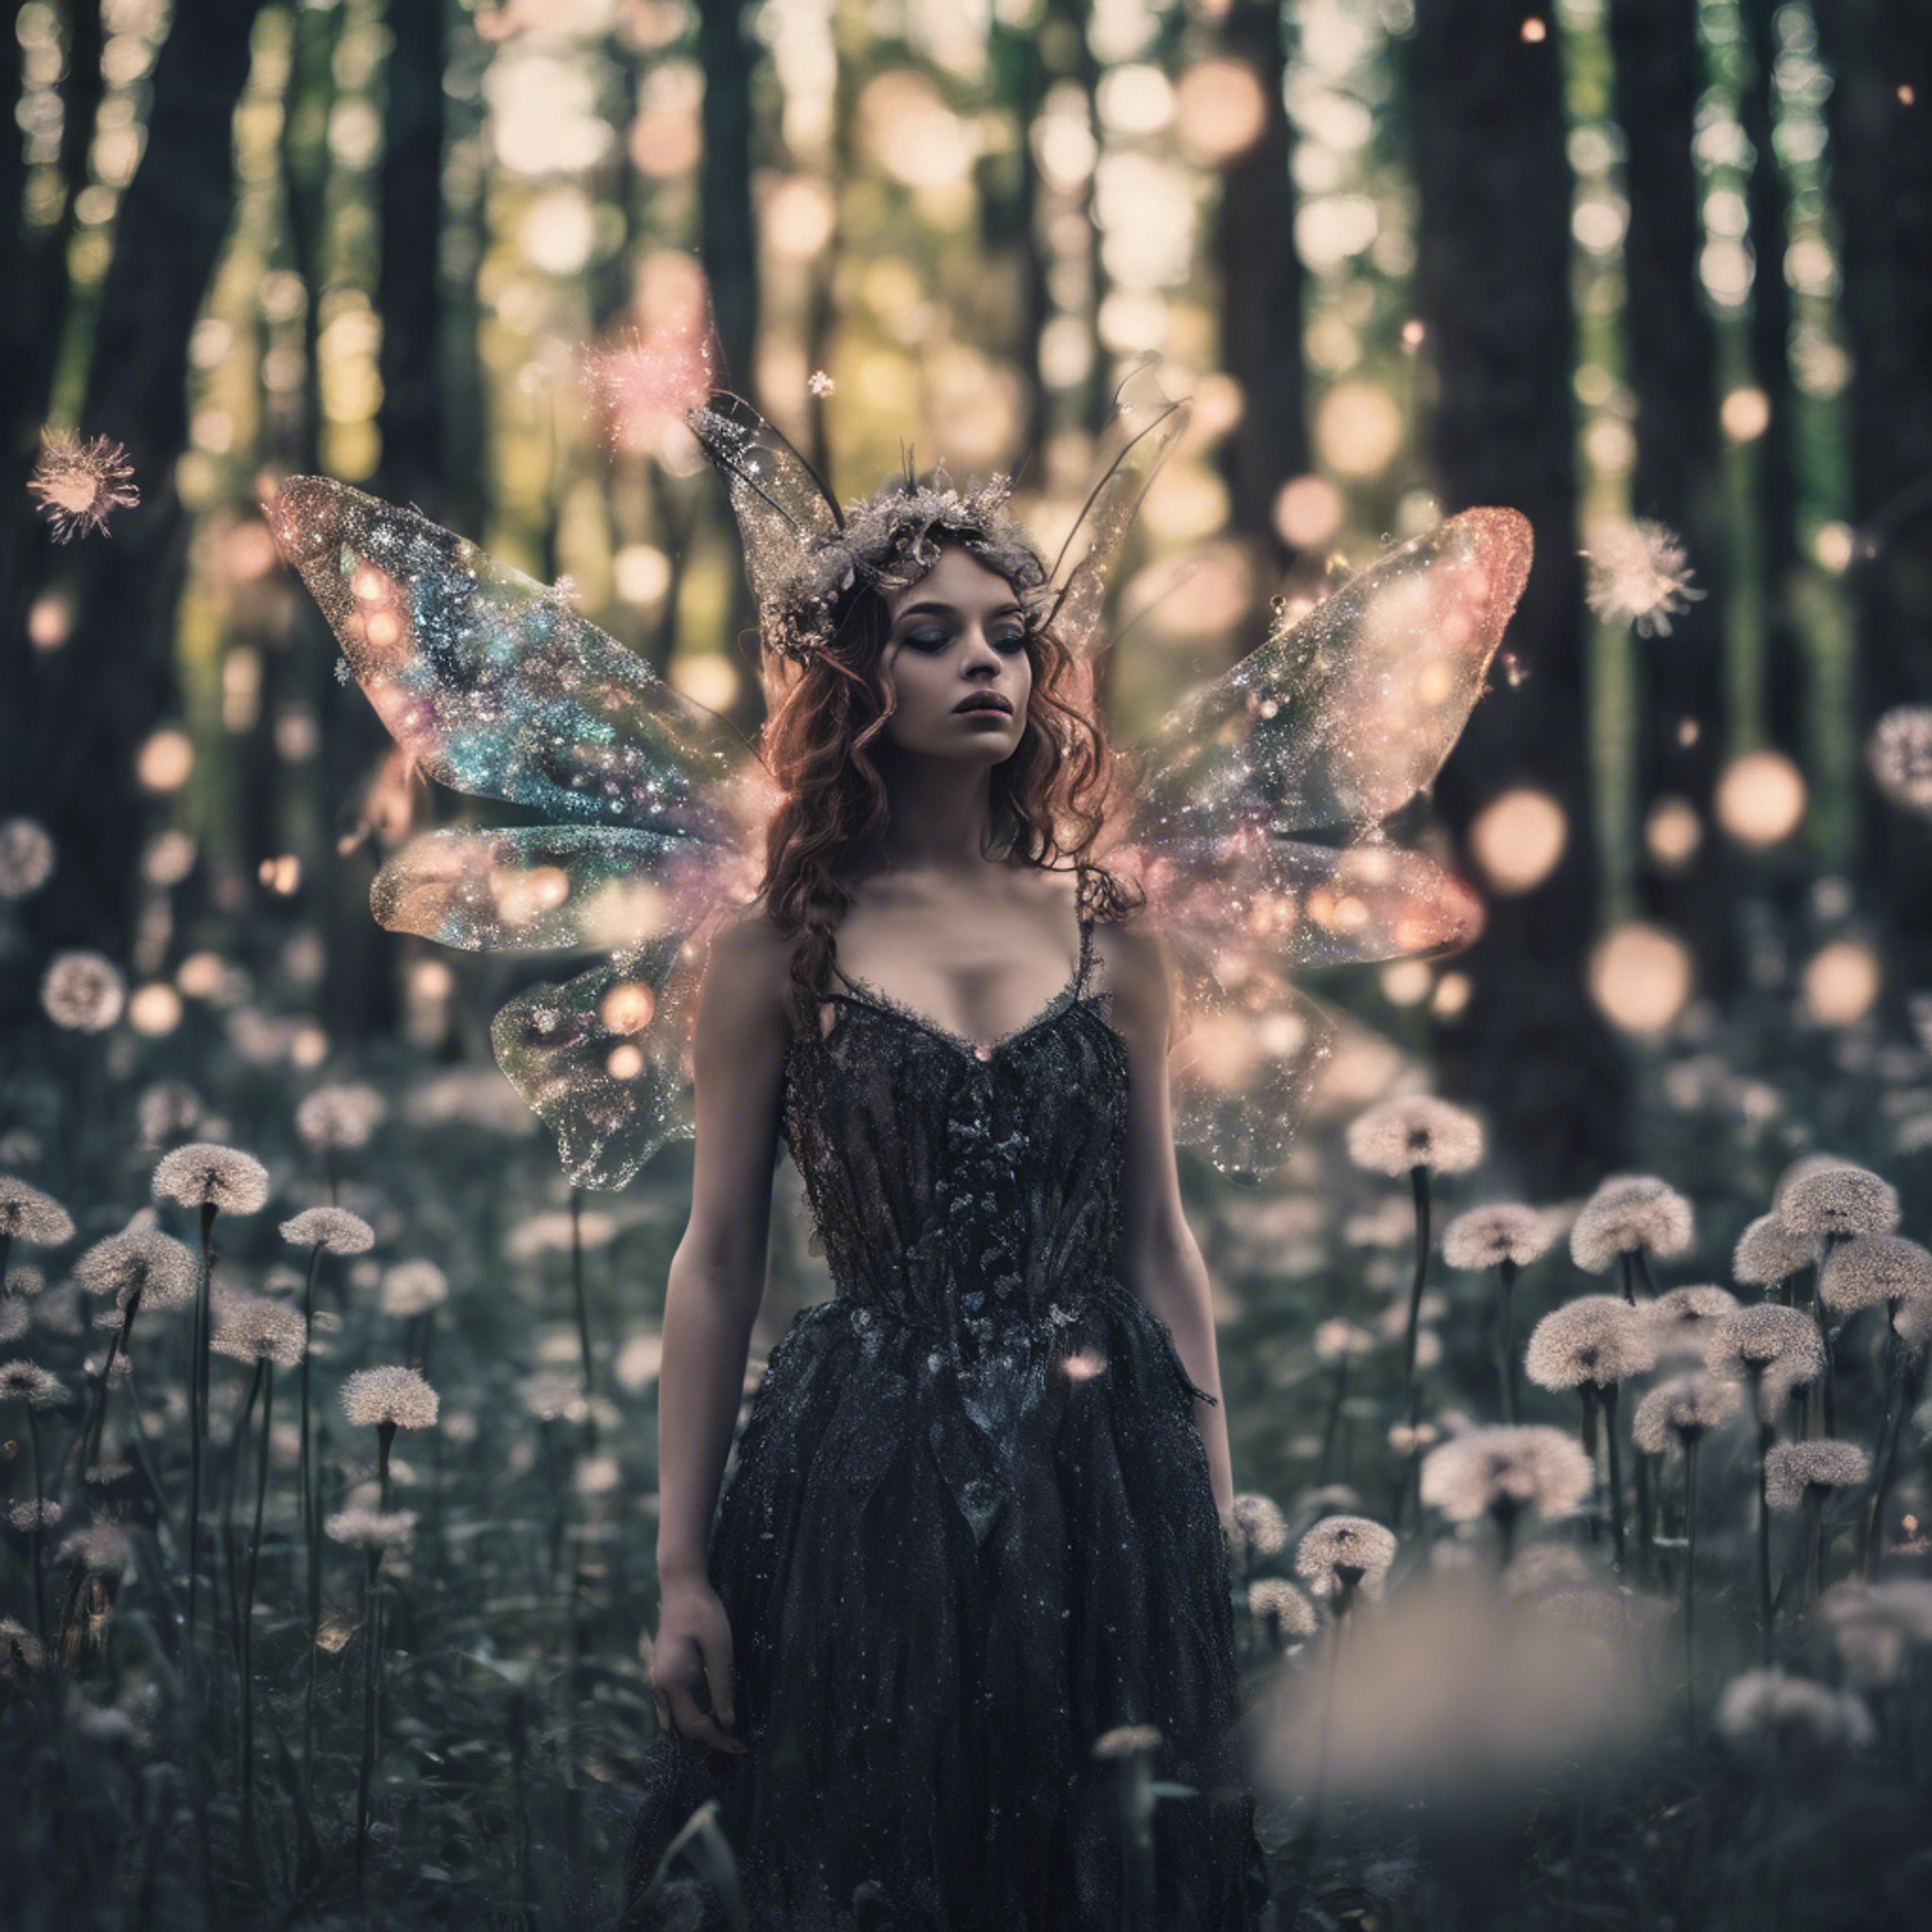 A whimsical gothic fairy flitting amongst shimmering neon dandelions in a magical forest.壁紙[faf2f07637684554a979]